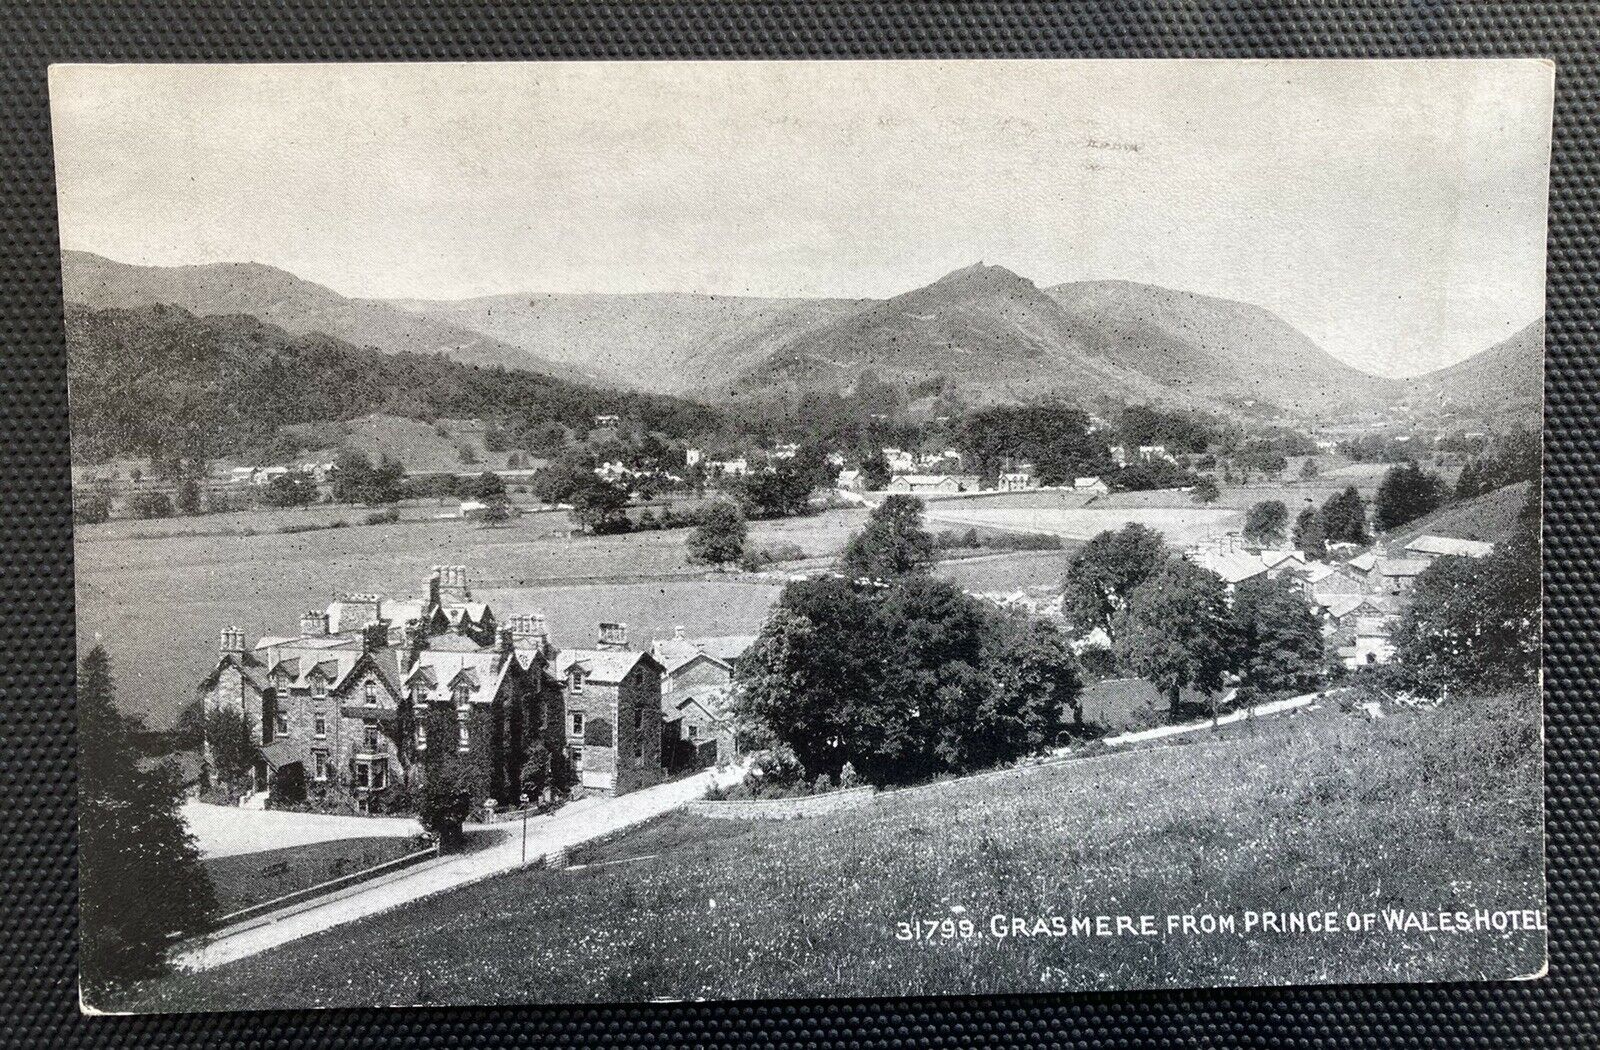 House Clearance - Prince of Wales Hotel - Grasmere - Cumbria - An Unused Vintage Service